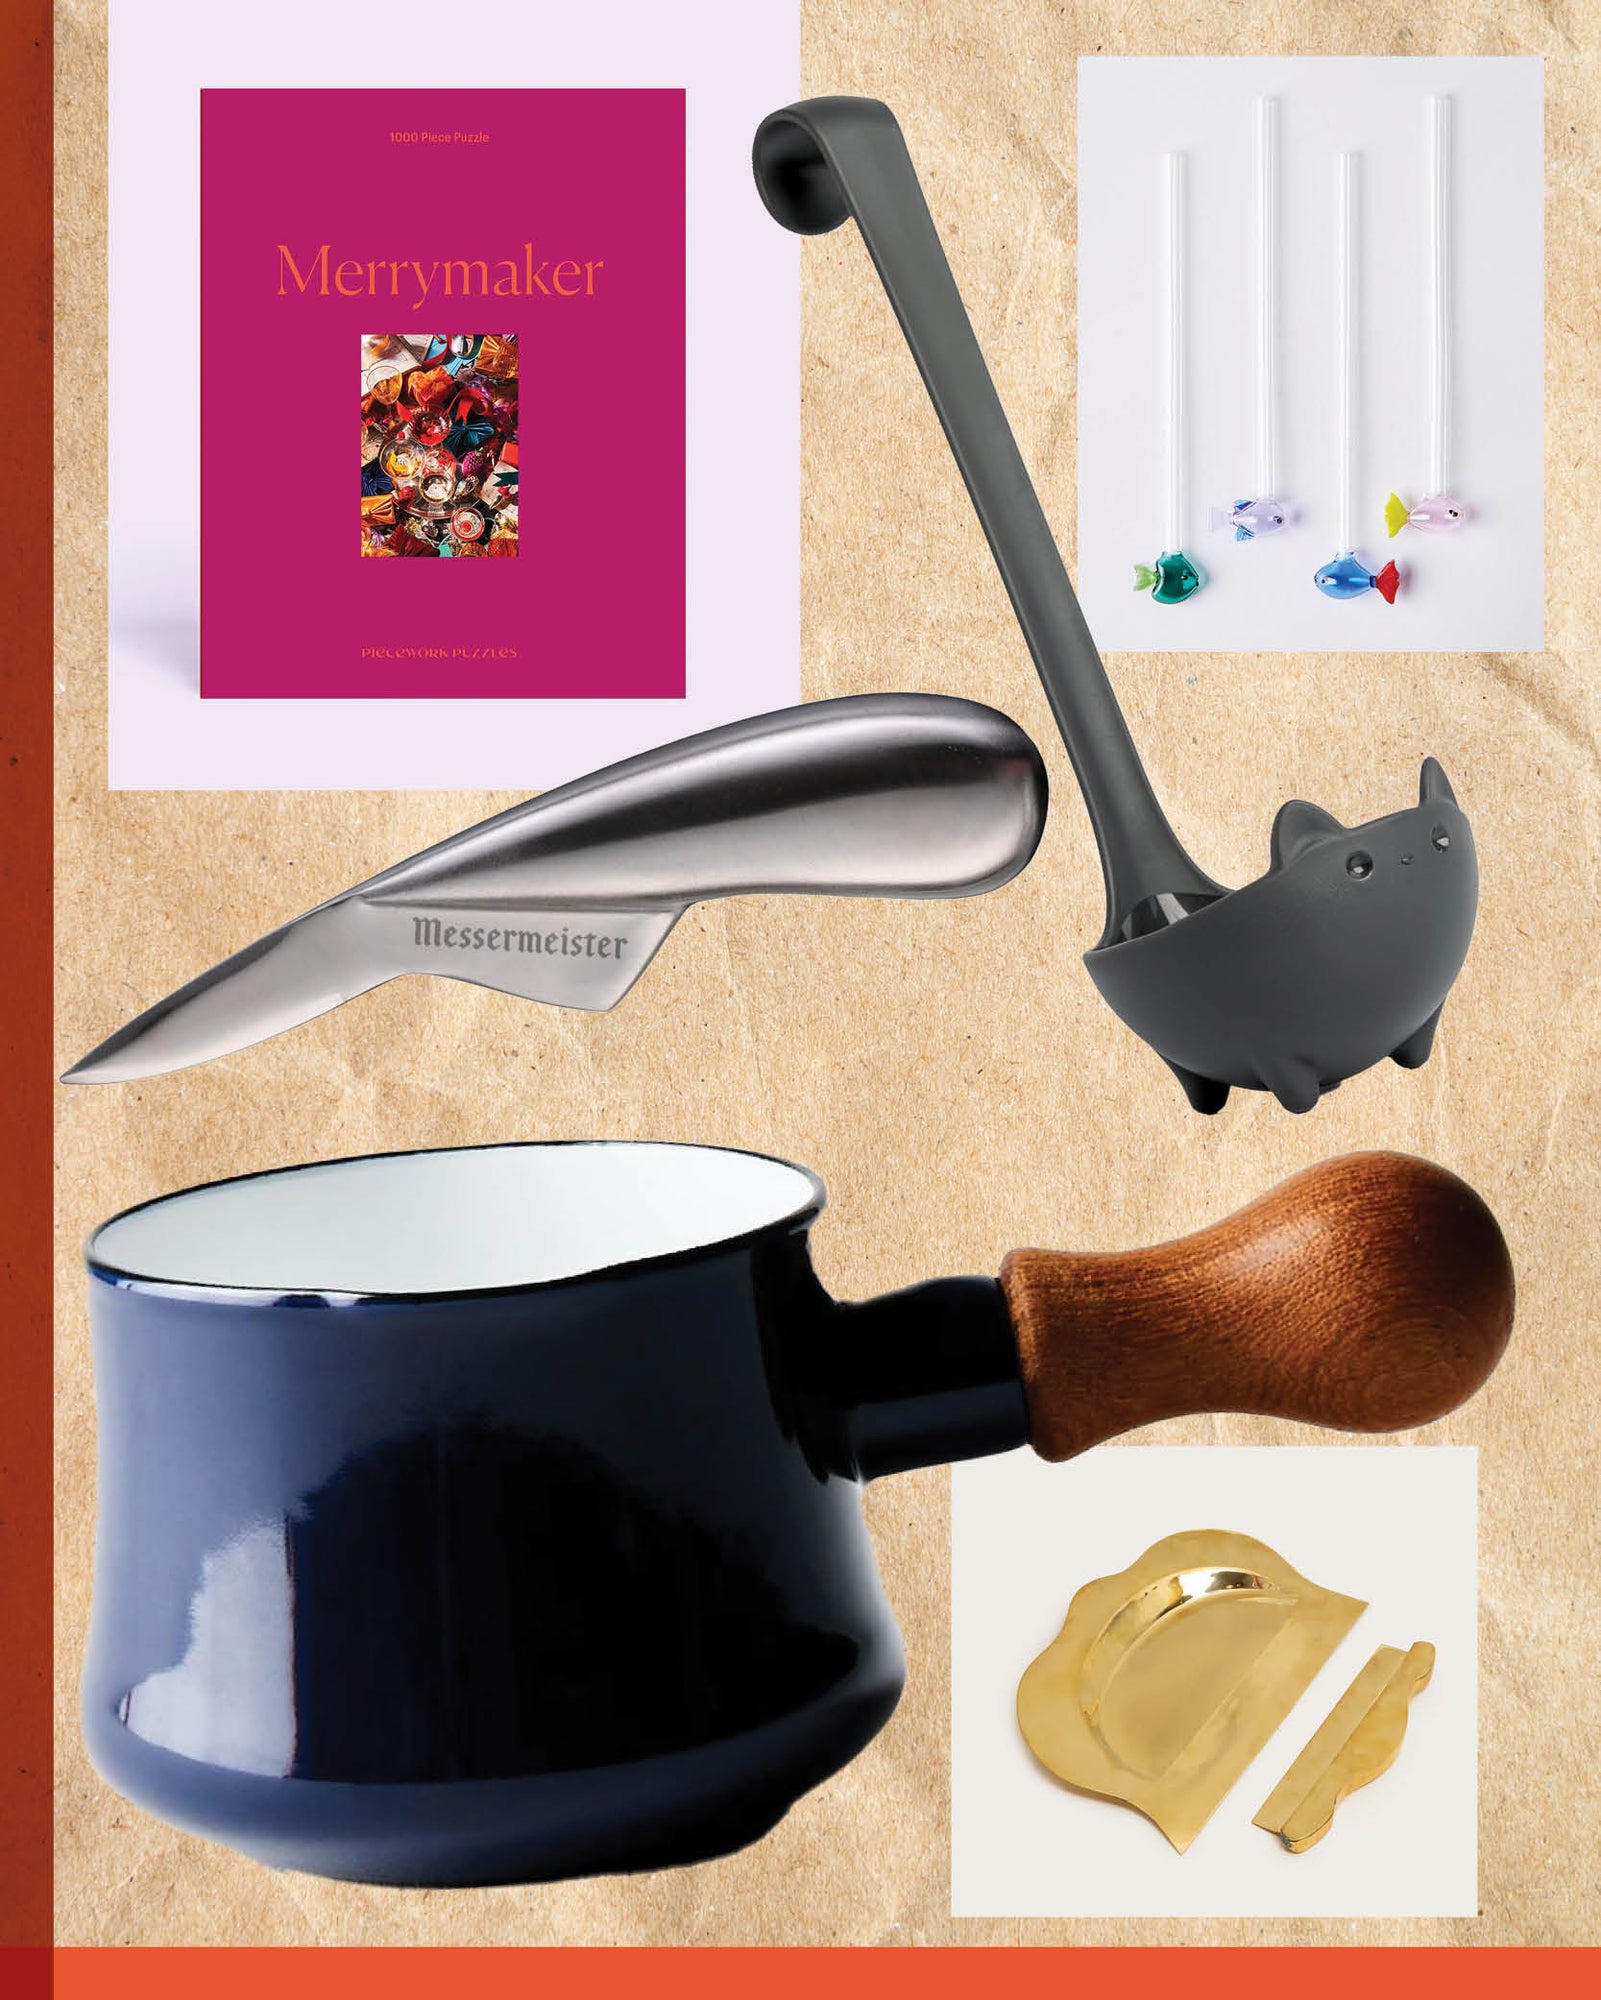 Kitchen Stocking Stuffers for Foodies & Gifts for Cooks · Nourish and Nestle